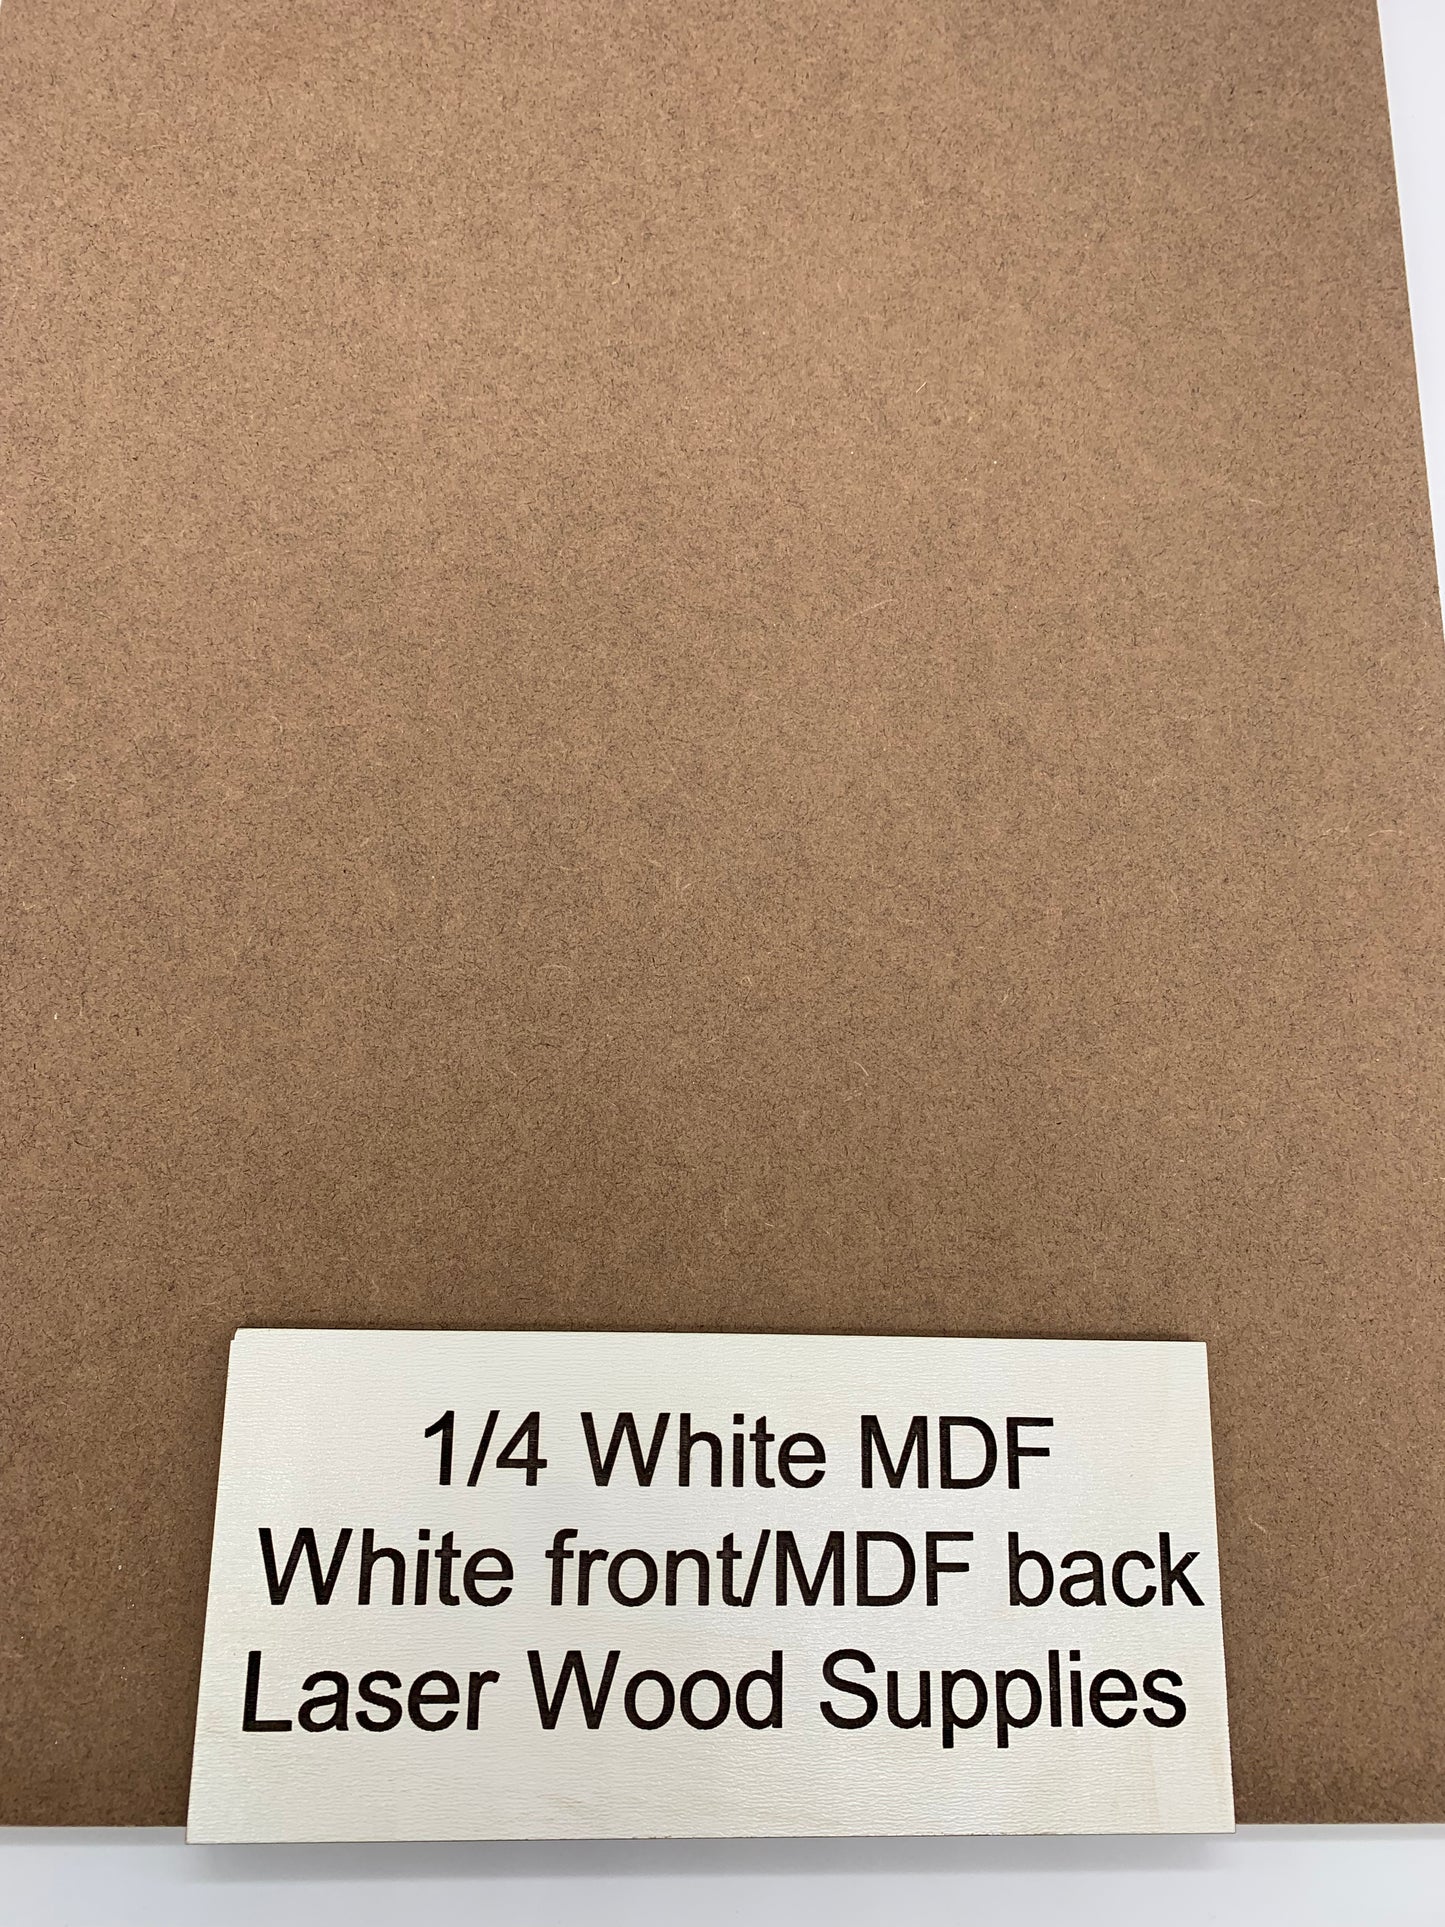 1/4 White MDF. Perfect for Glowforge or other CO2 Lasers